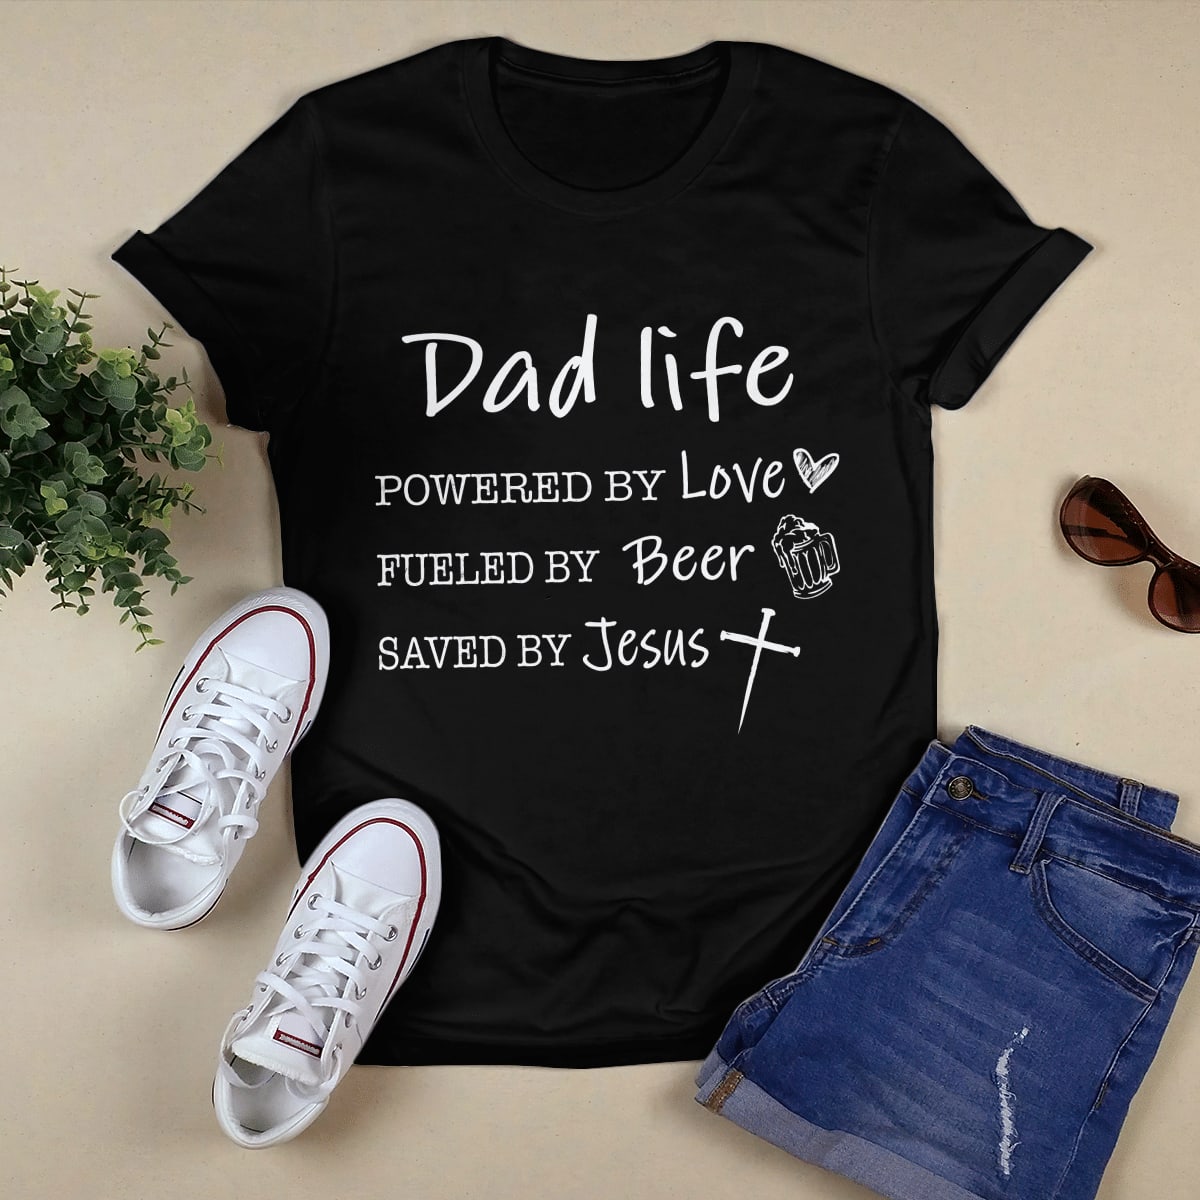 Dad Life, Powered By Love, Fueled By Beer, Saved By Jesus, Dad T-Shirt